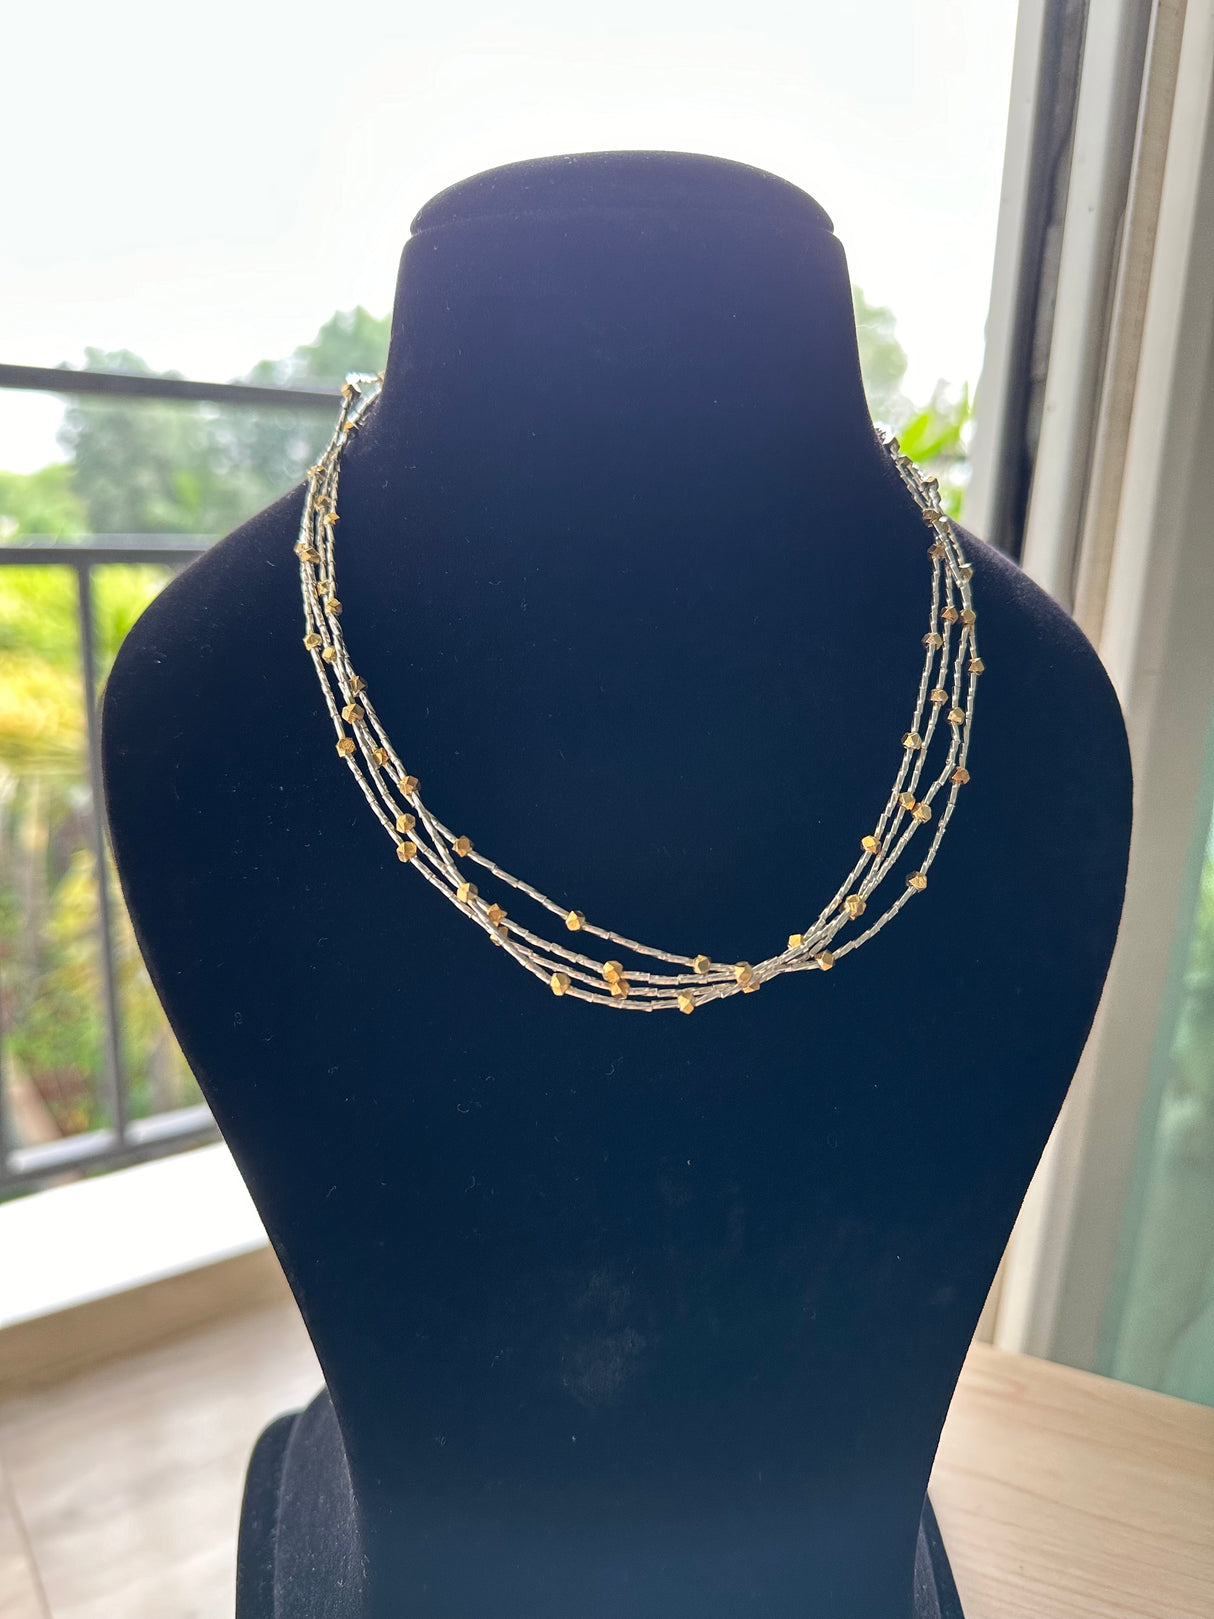 Contemporary Two-Tone Necklace made using 92.5 Silver